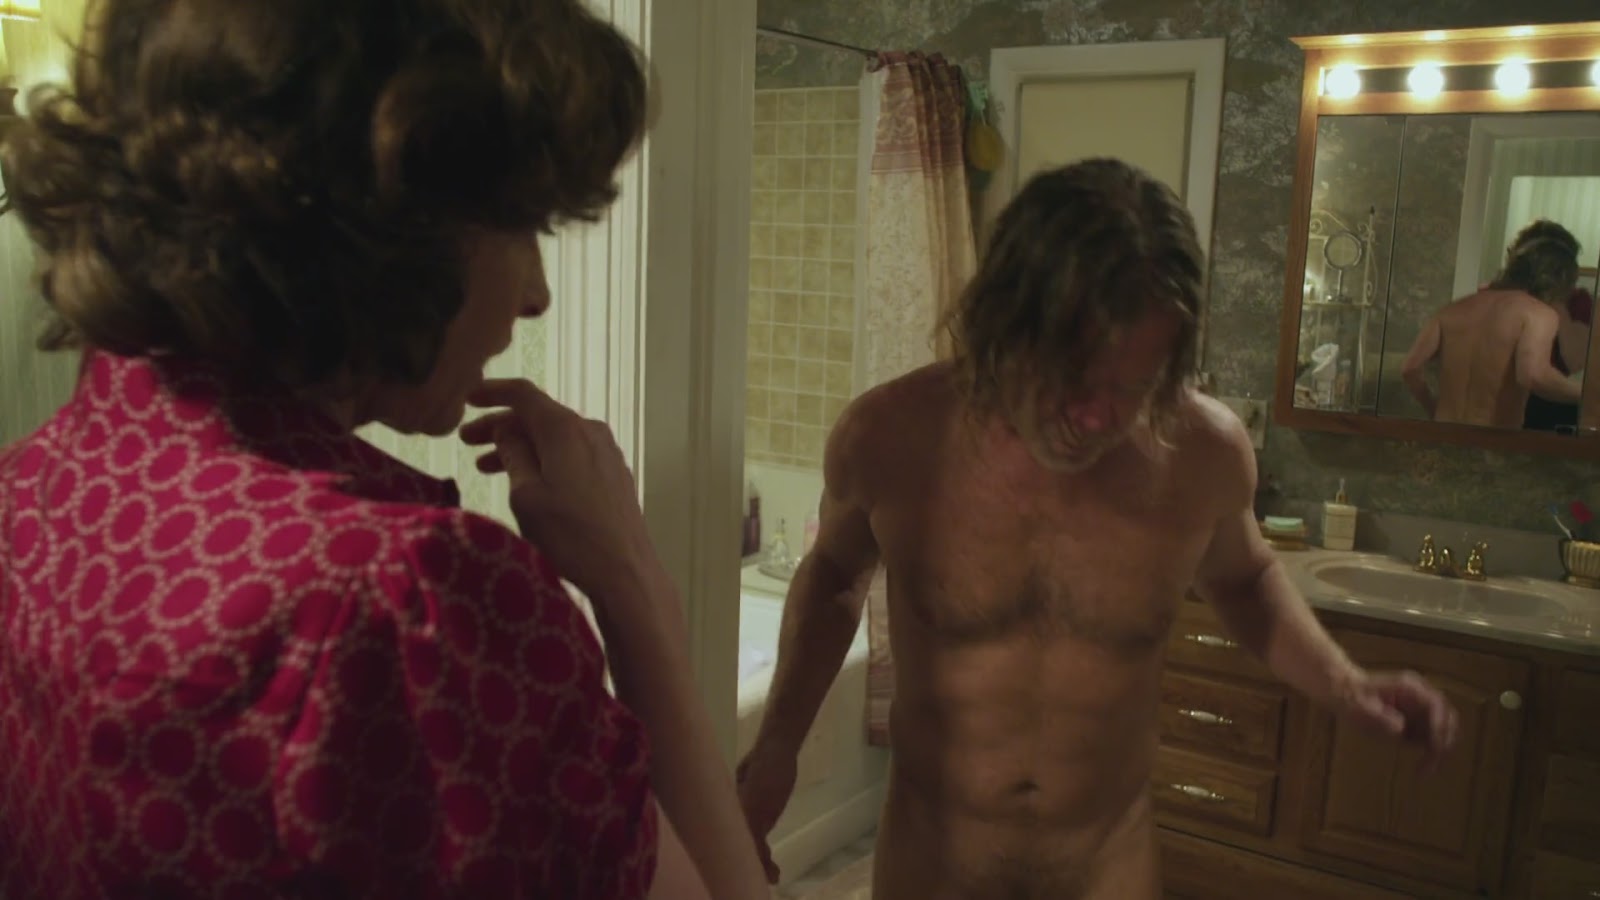 William H. Macy nude in Shameless 1-02 "Frank The Plank" .